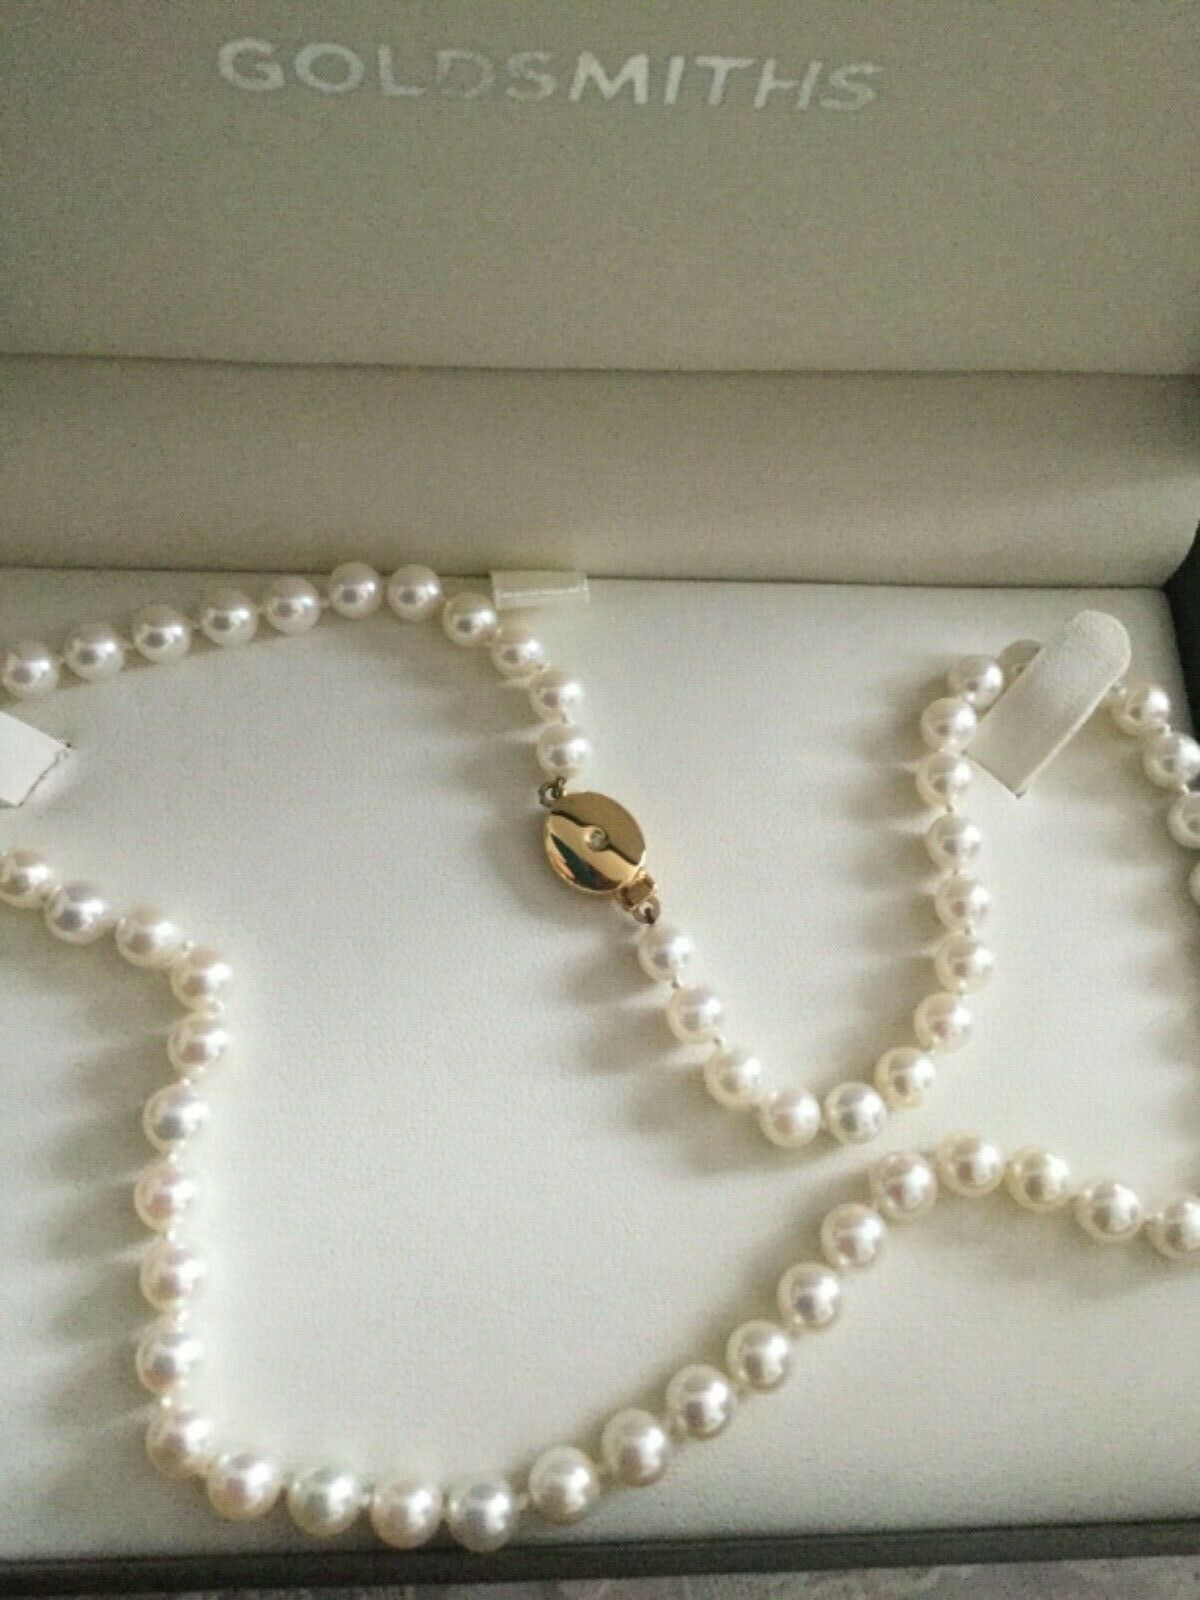 Goldsmith Pearl Necklace with 18ct gold and diamond clasp - Image 3 of 6